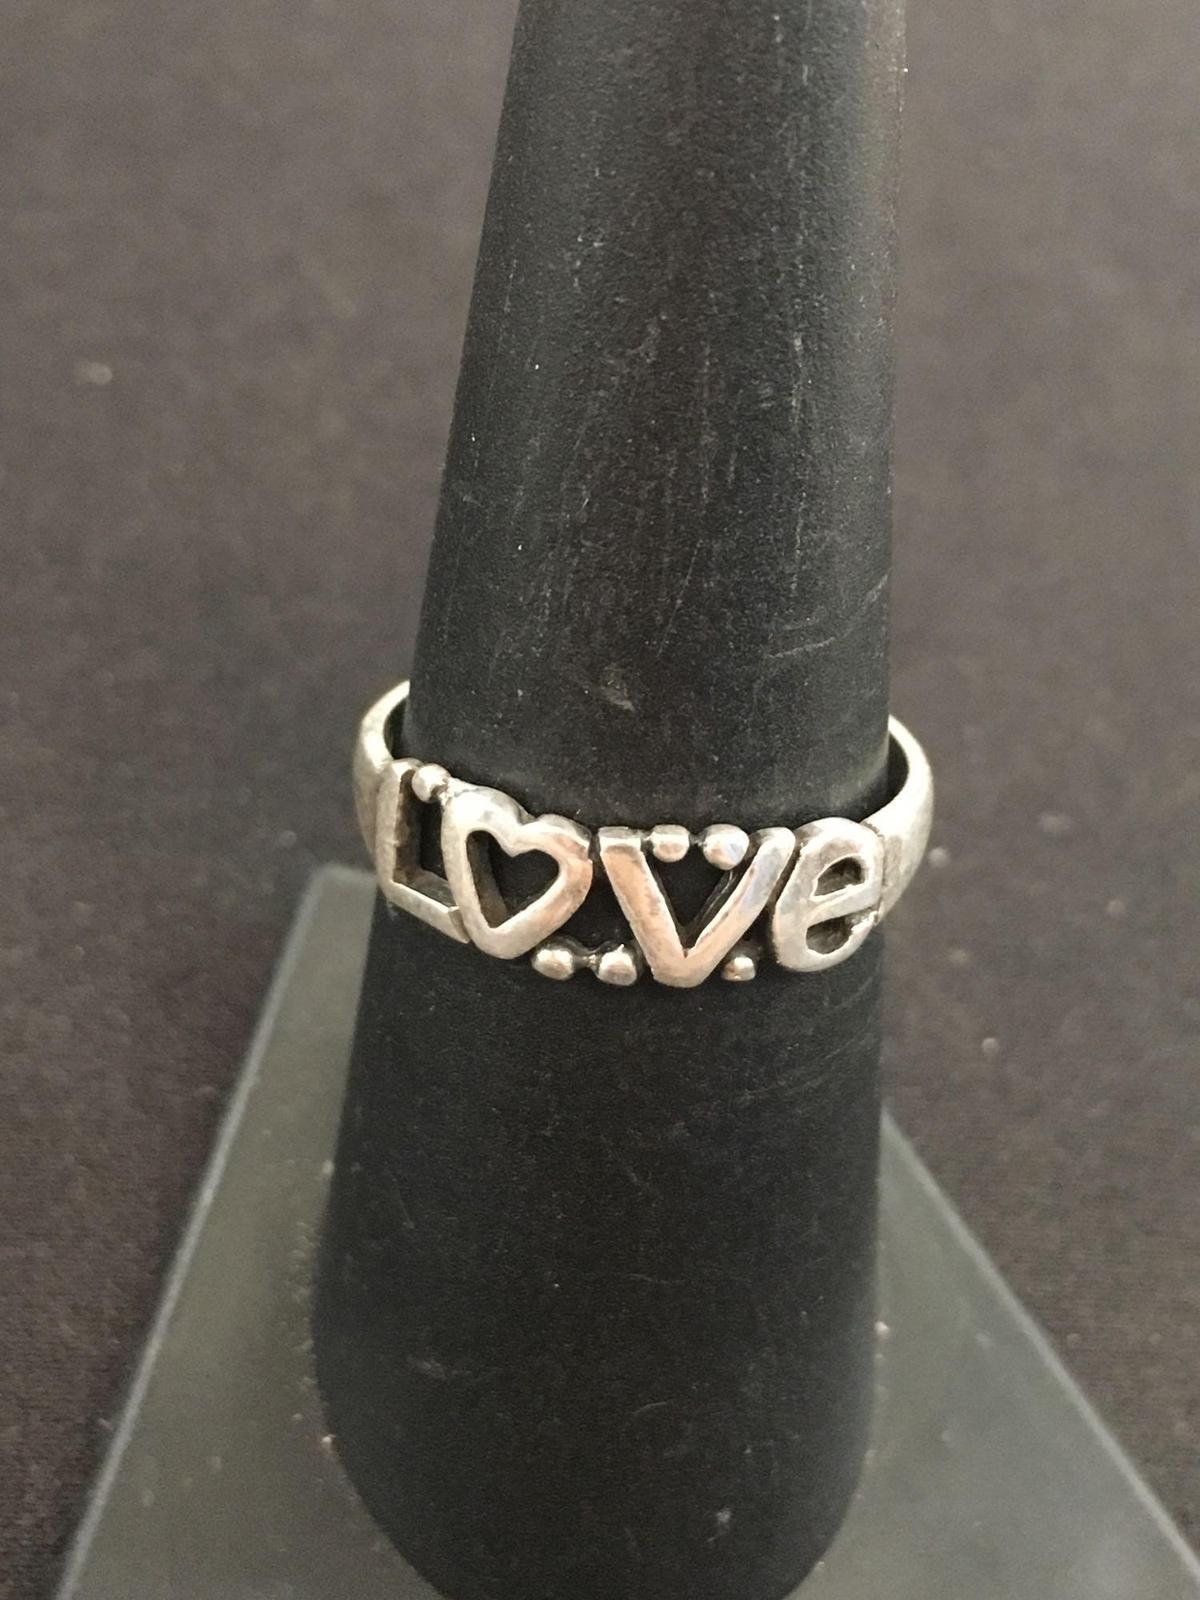 "L.O.V.E." Letter Styled Sterling Silver Ring Band - Size 7.5